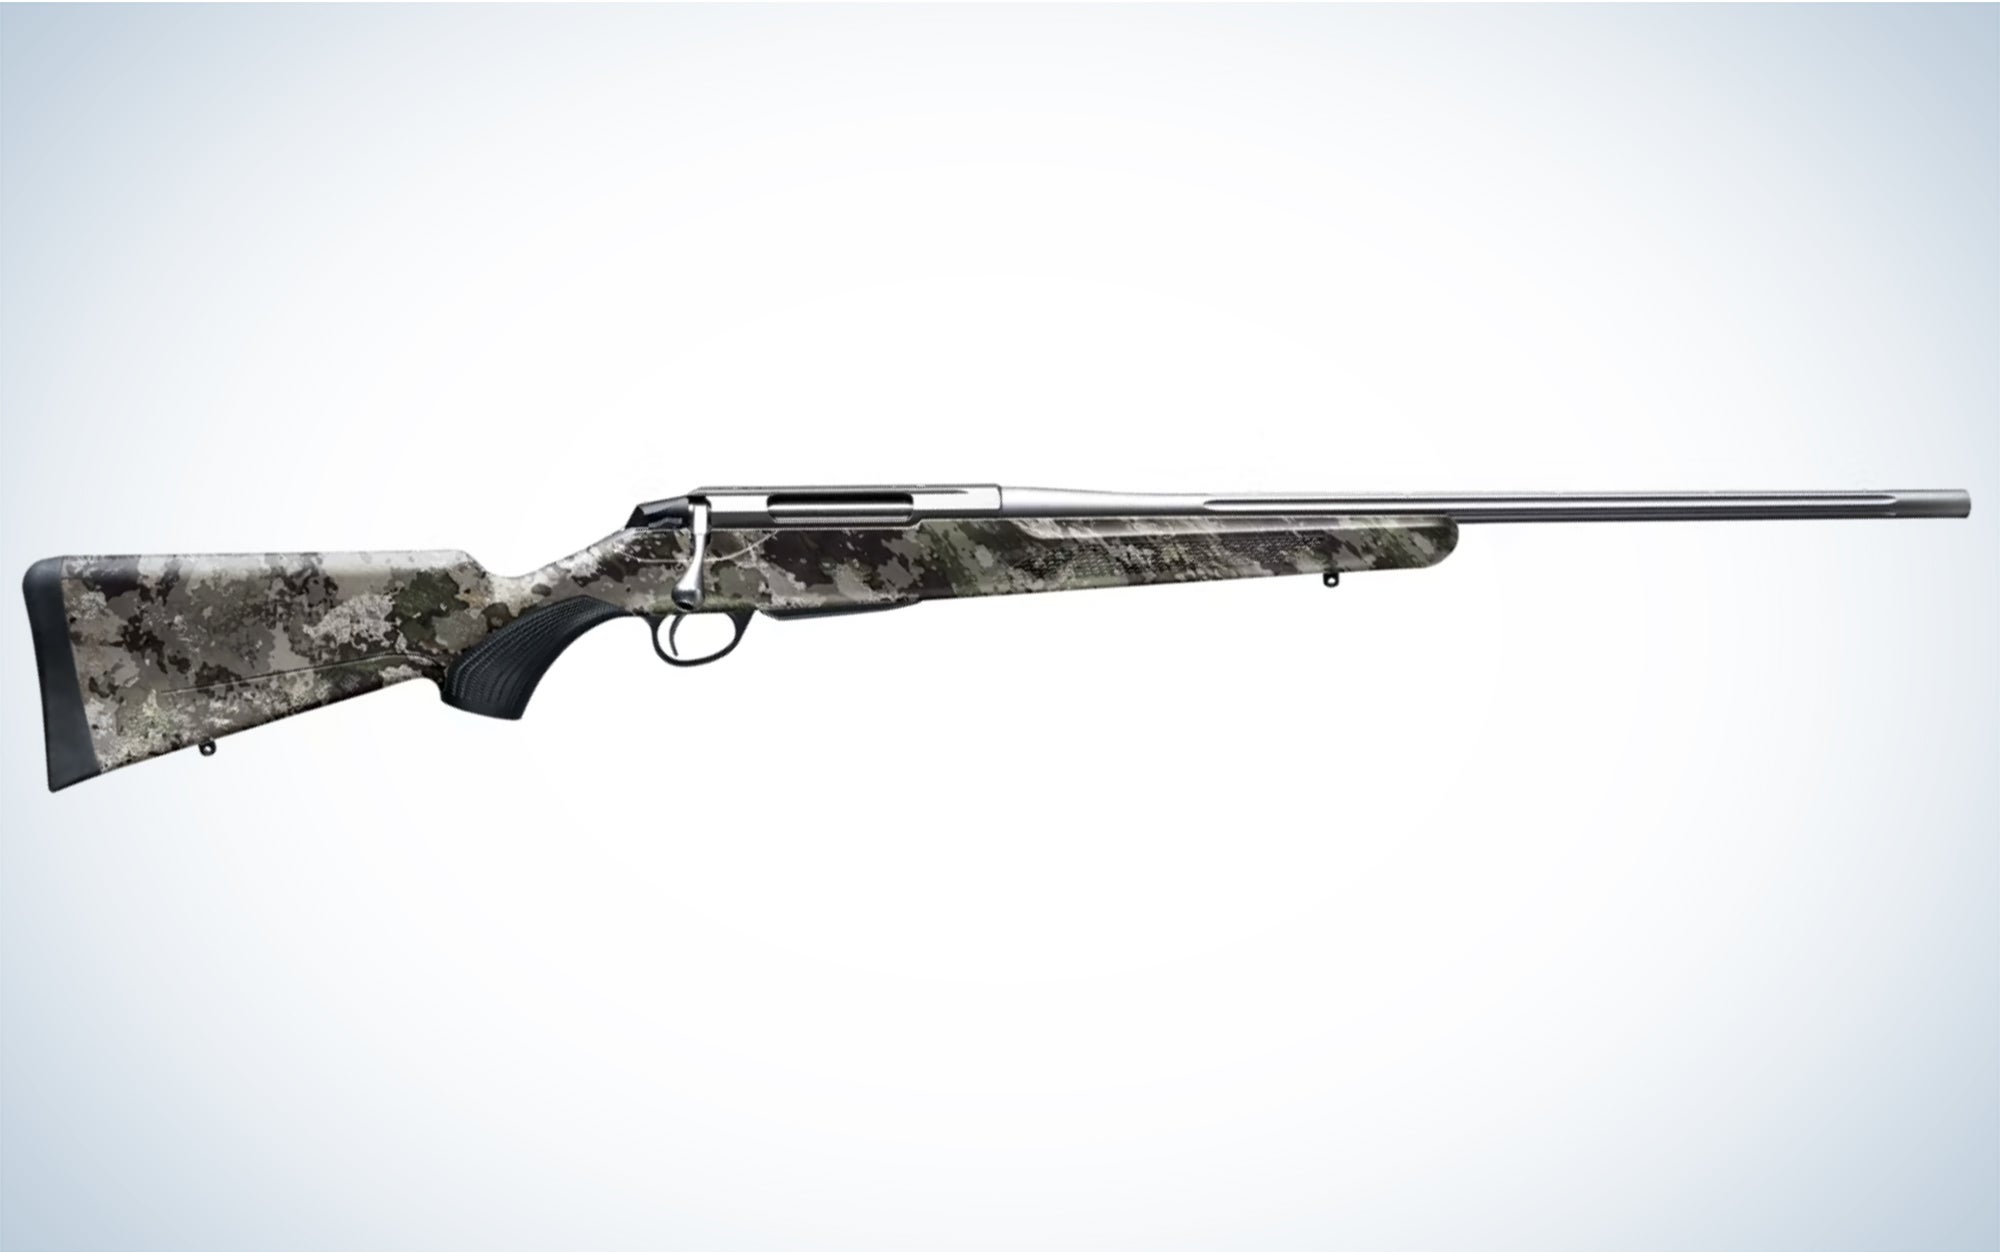 The Tikka T3x Superlite is one of the best rifles for mountain hunts.